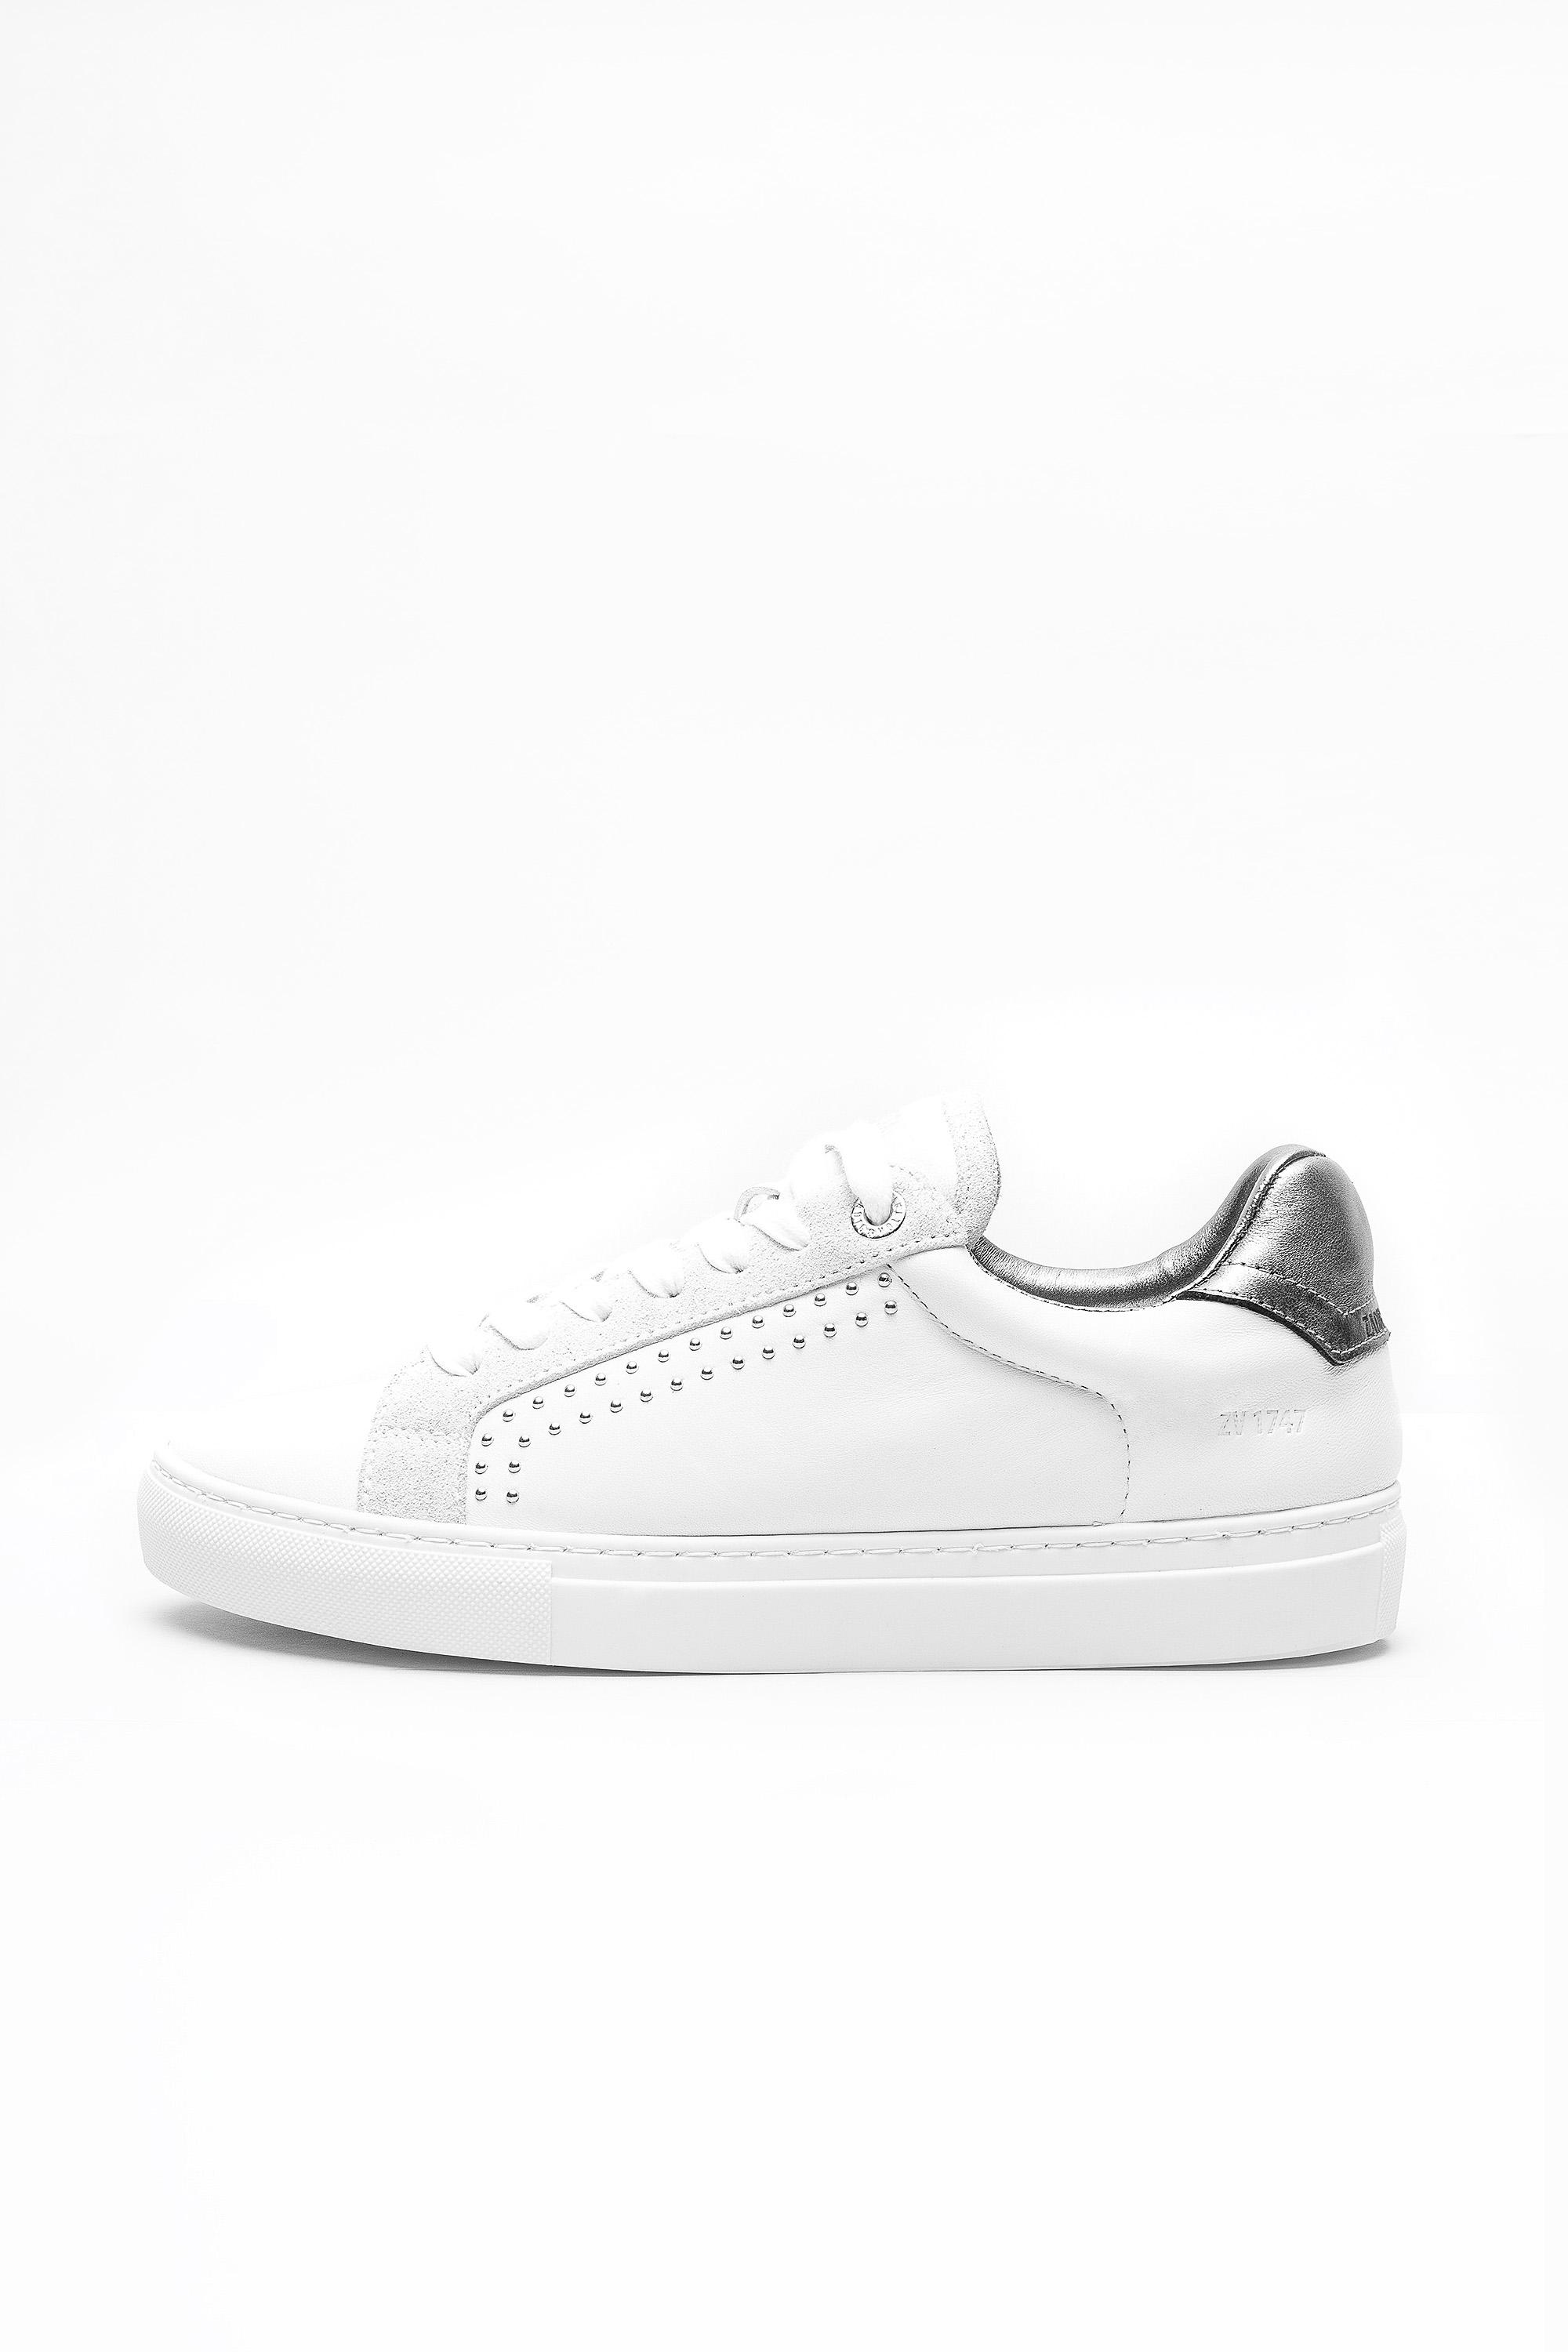 Zadig & Voltaire Zv1747 Studded Leather Low-top Sneakers in White - Lyst